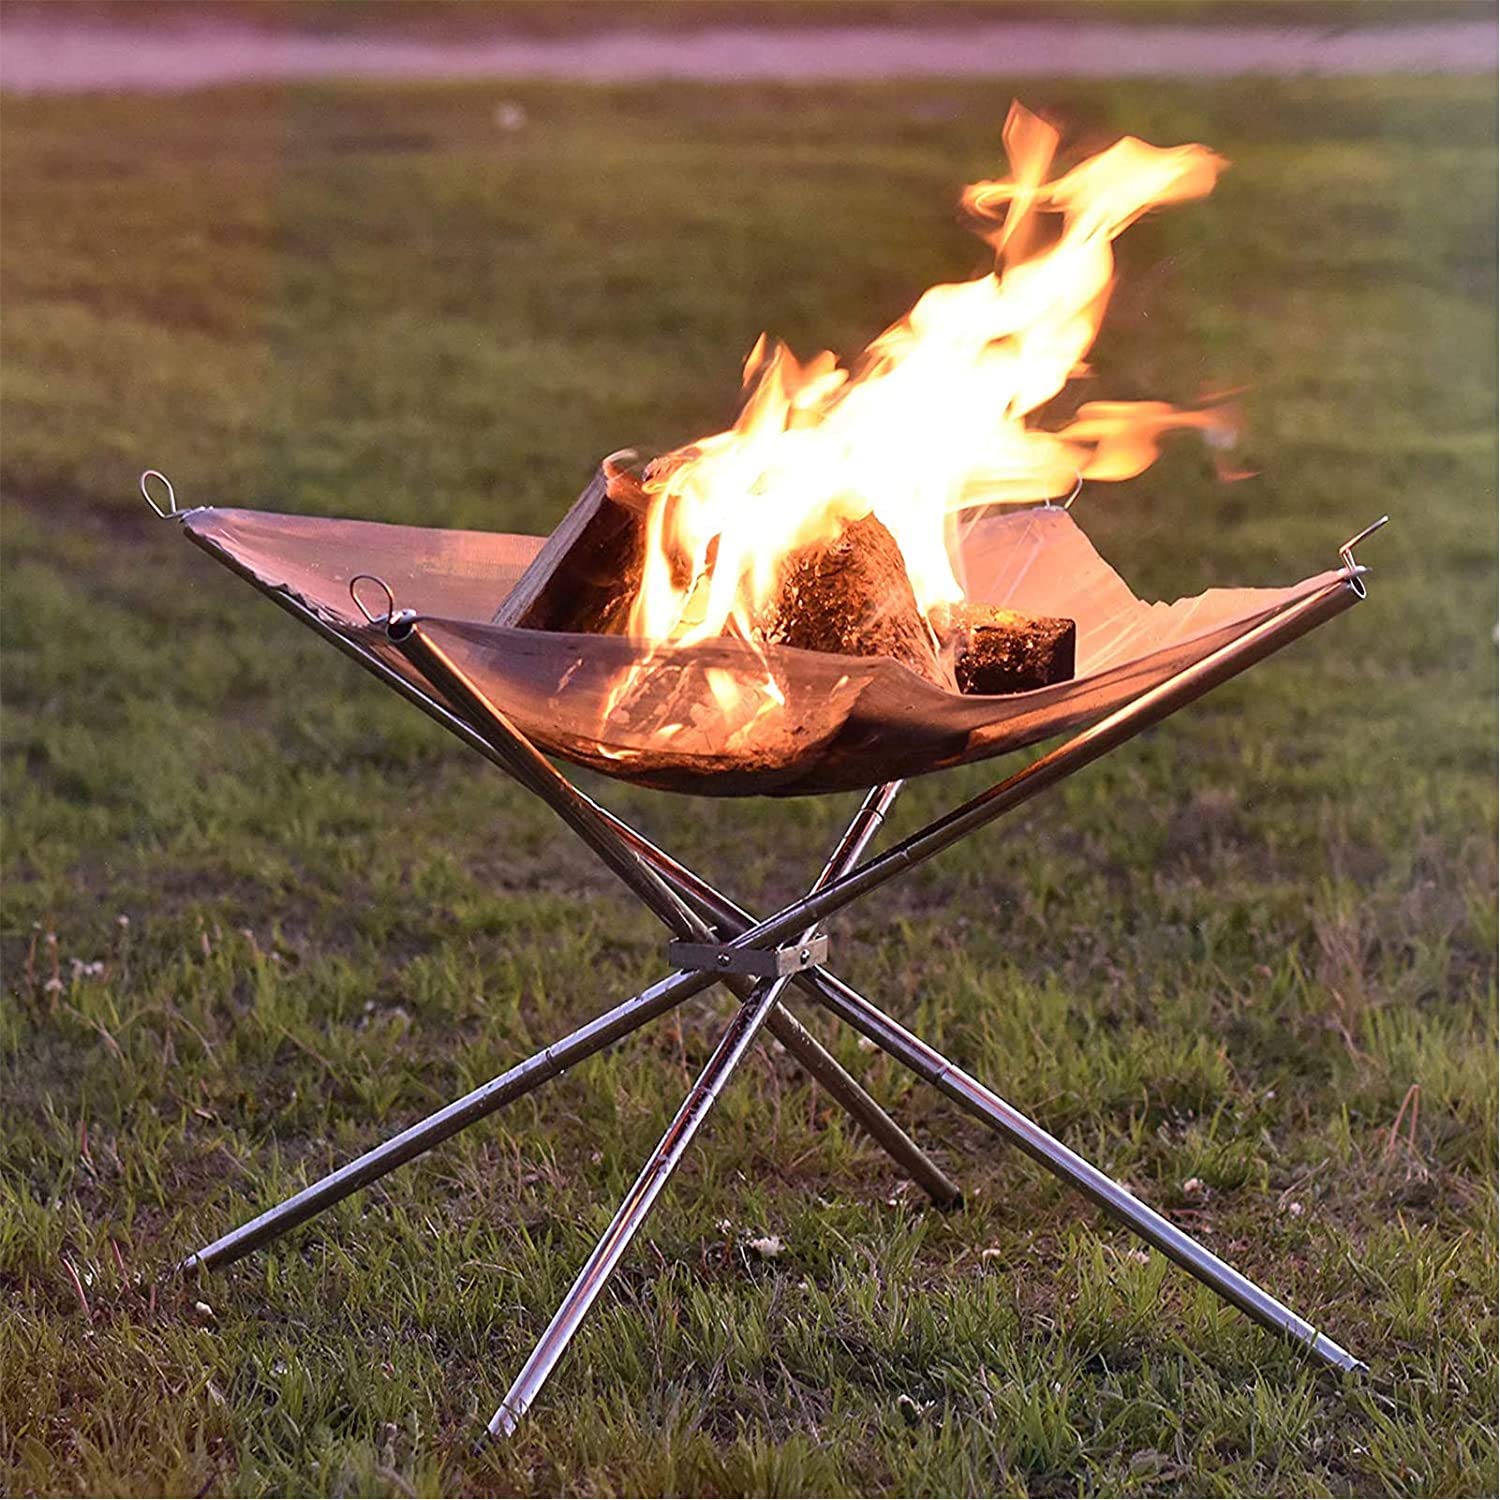 Stainless Steel Fire Pit With Fire.